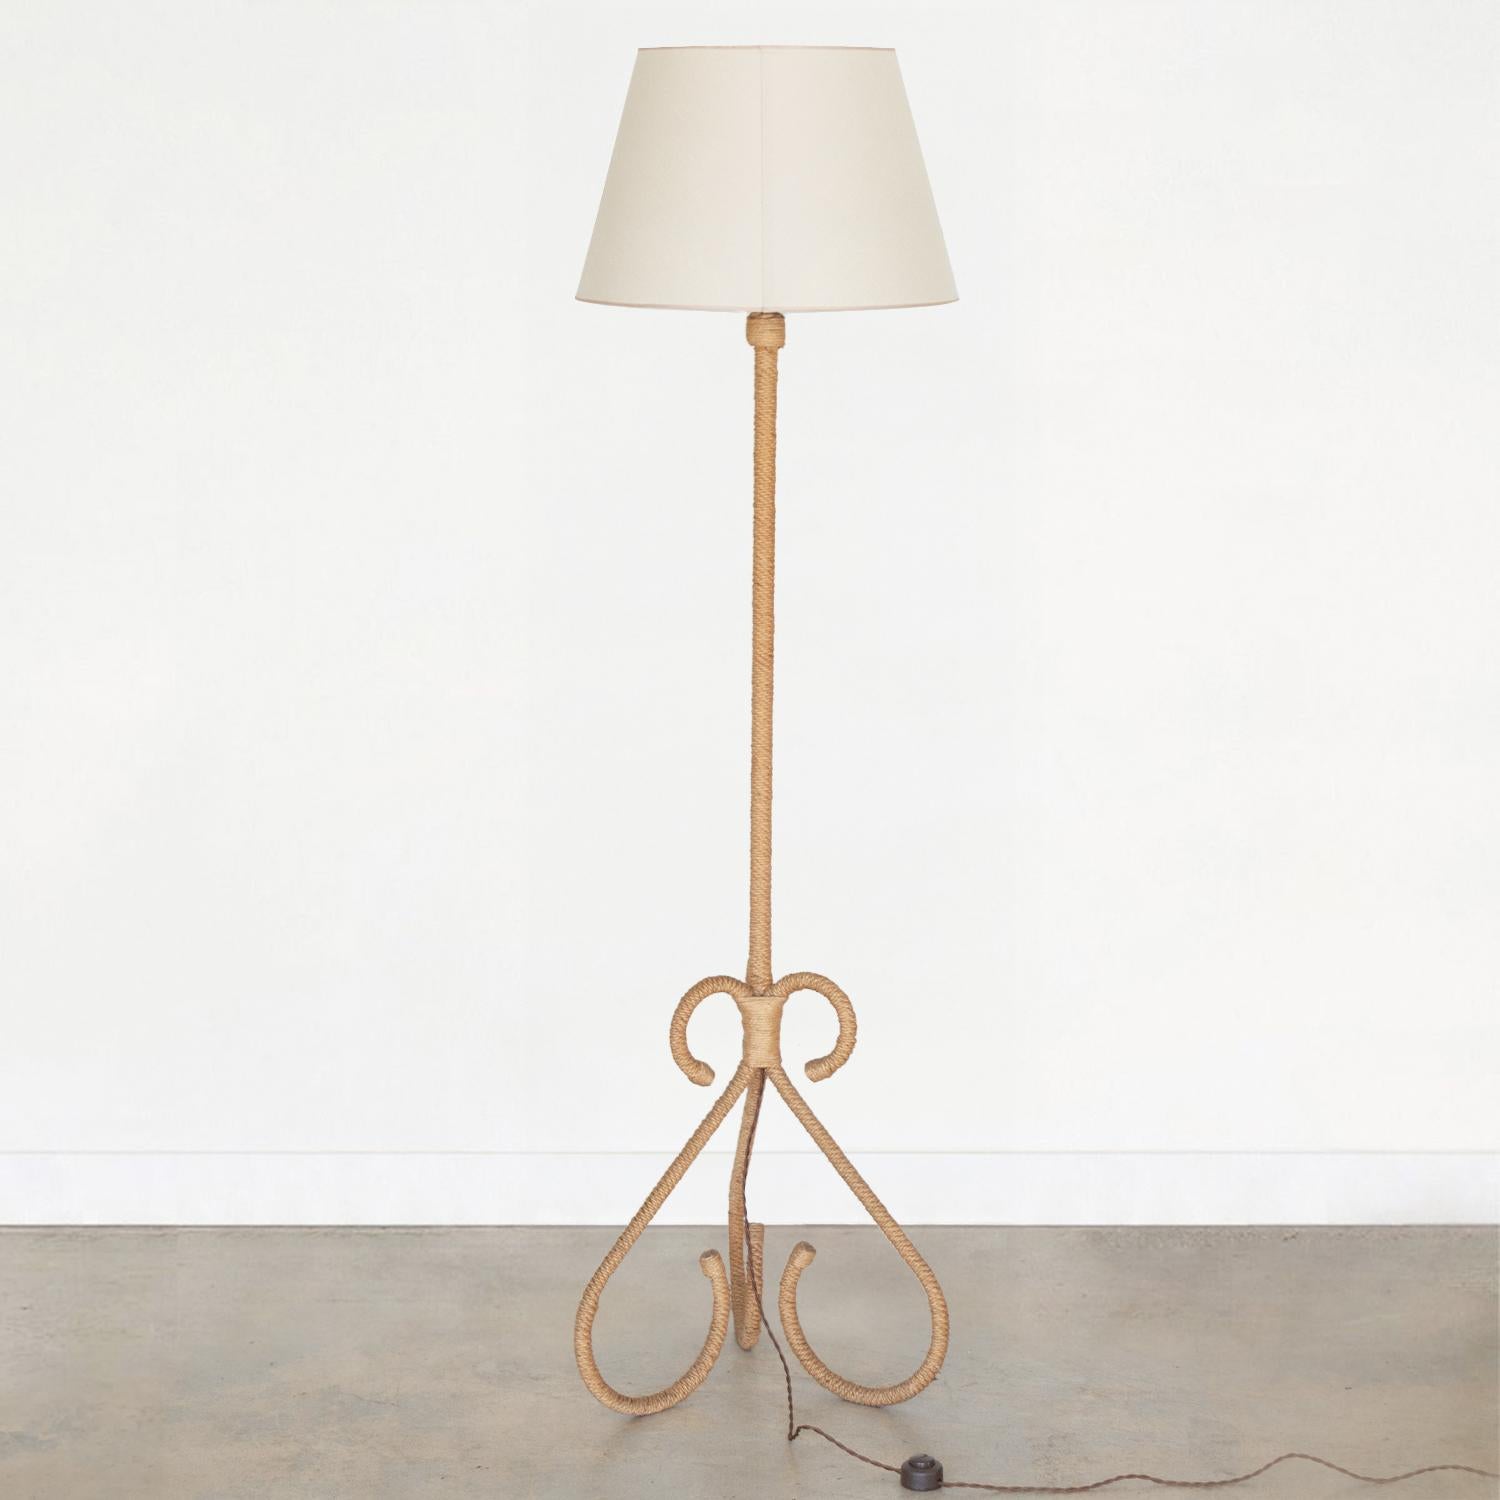 20th Century French Rope Floor Lamp by Audoux-Minet